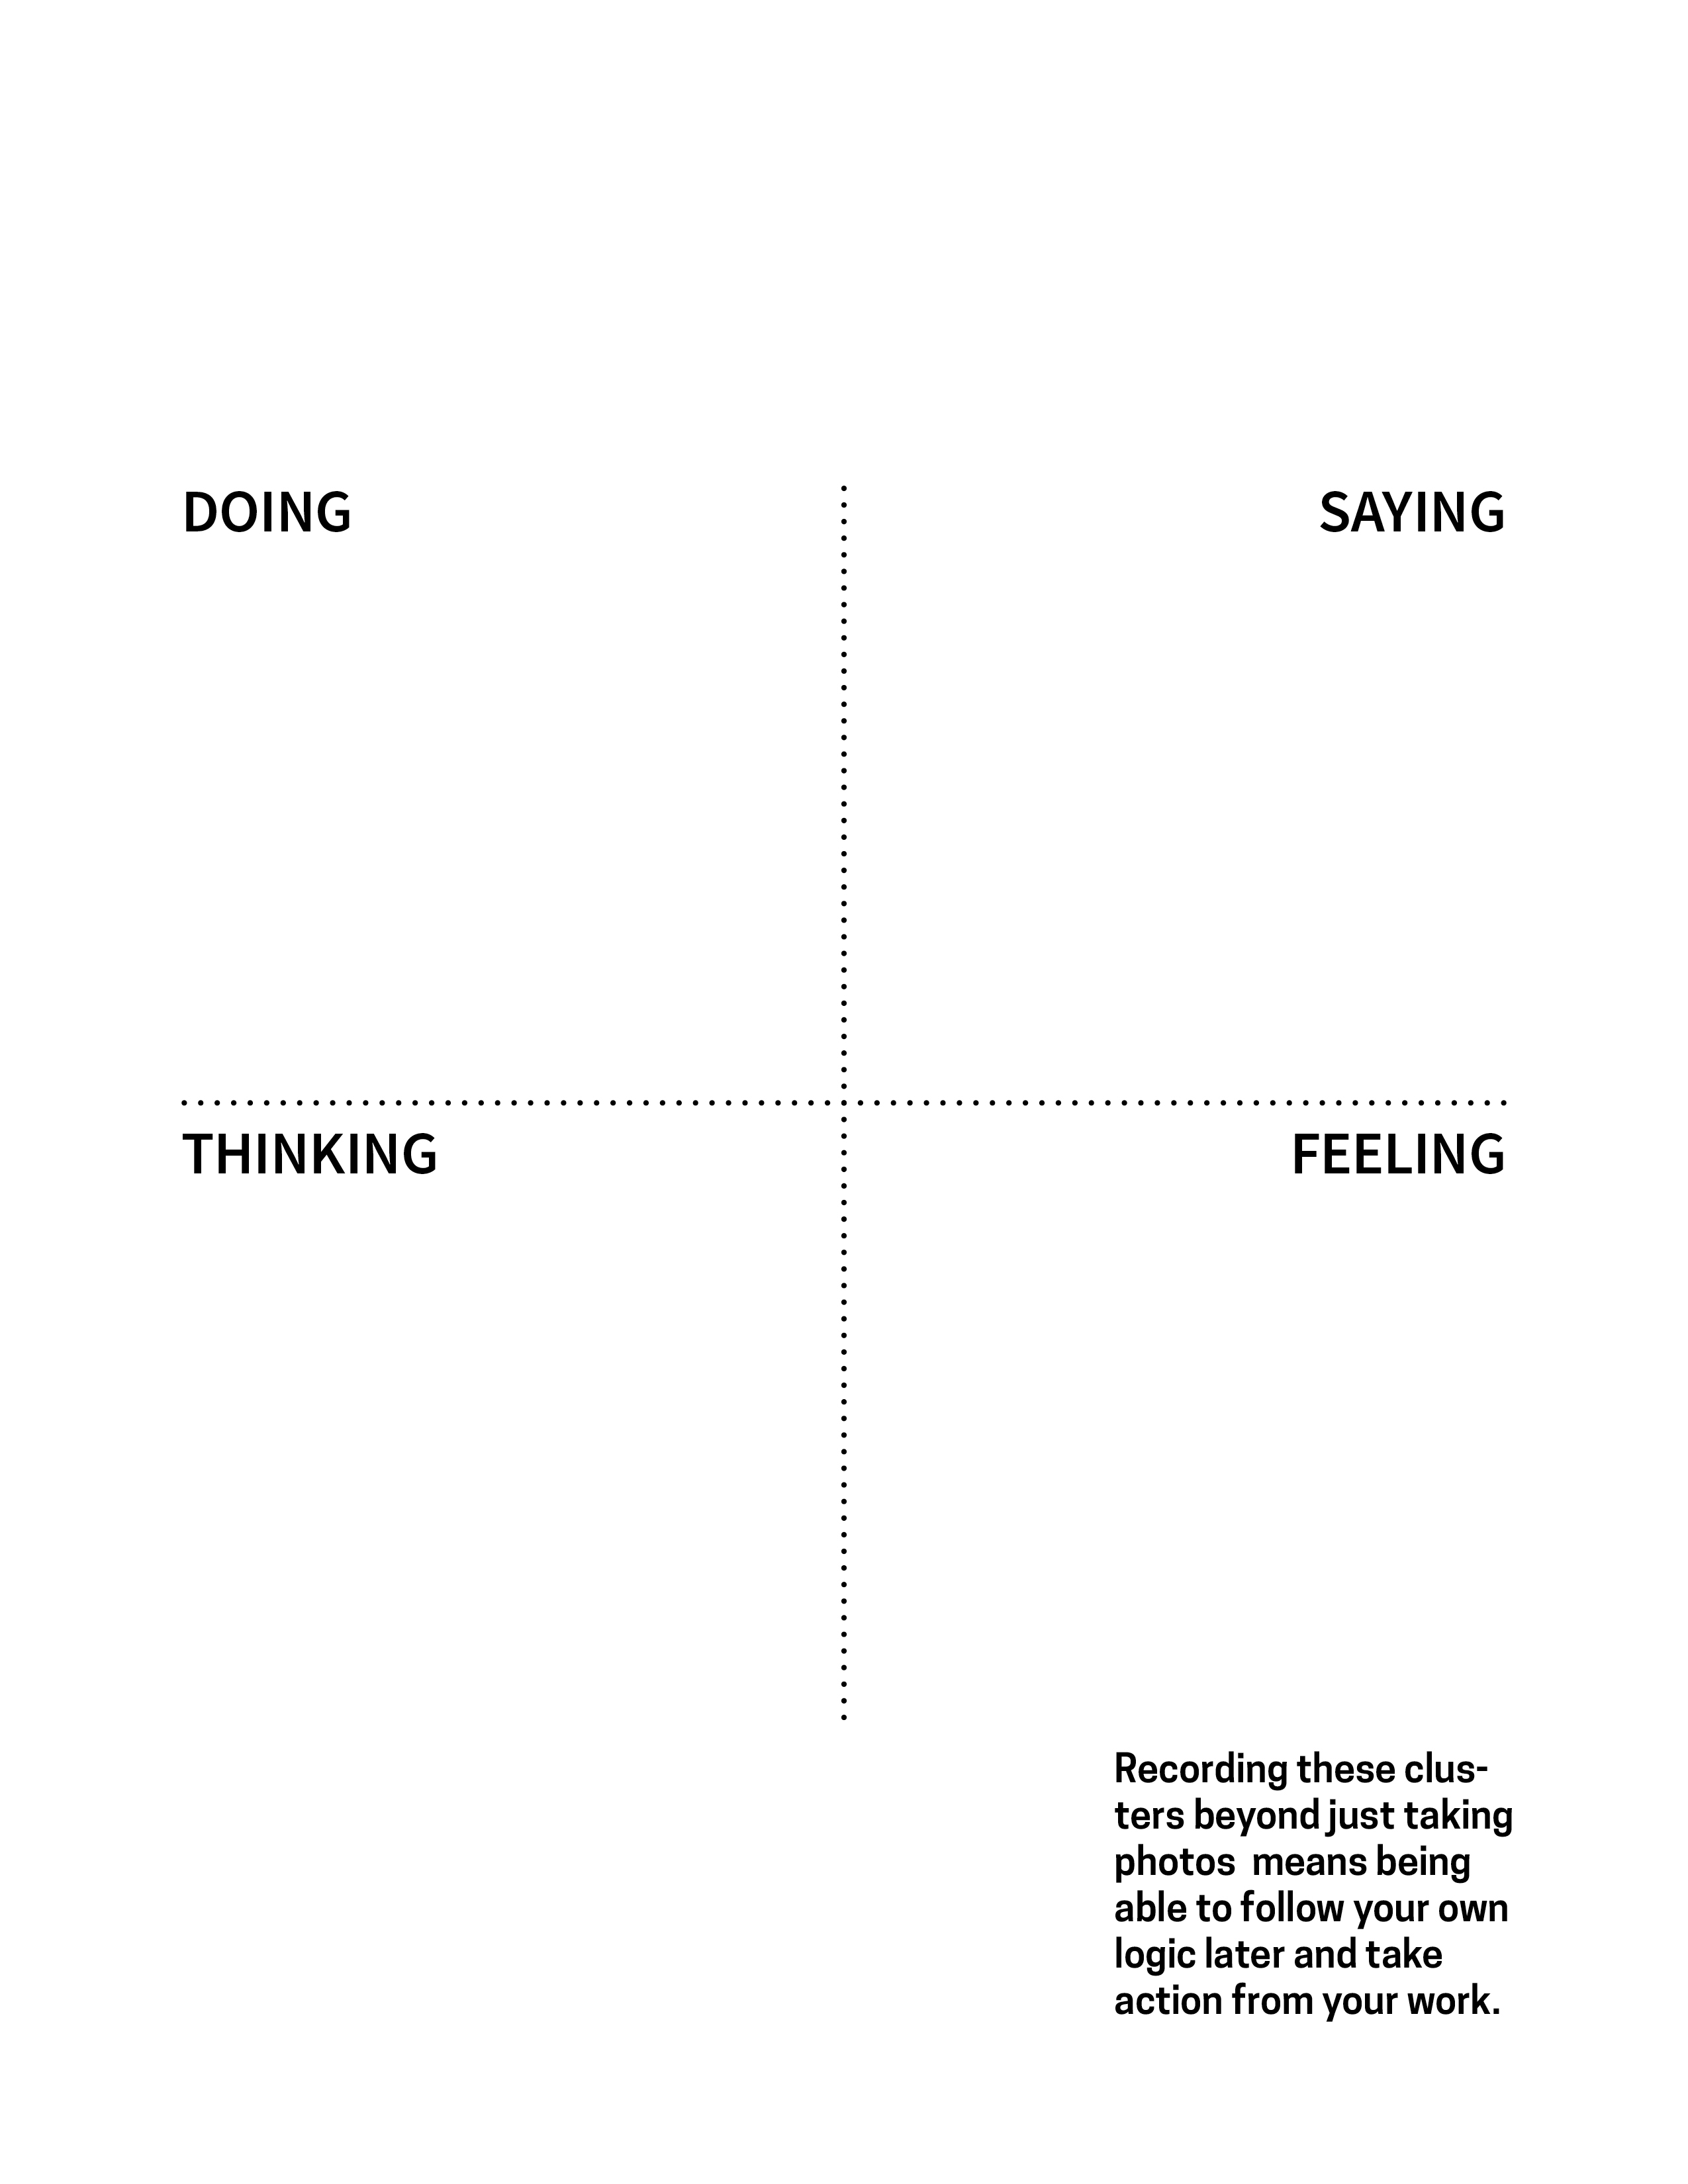 Framework for doing, saying, thinking, feeling analysis. It shows a quadrant. Each of the four squares in the quadrant are labeled either Doing, Saying, Thinking, or Feeling. In-image caption reads: Recording these clusters beyond just taking photos  means being able to follow your own logic later and take action from your work."">